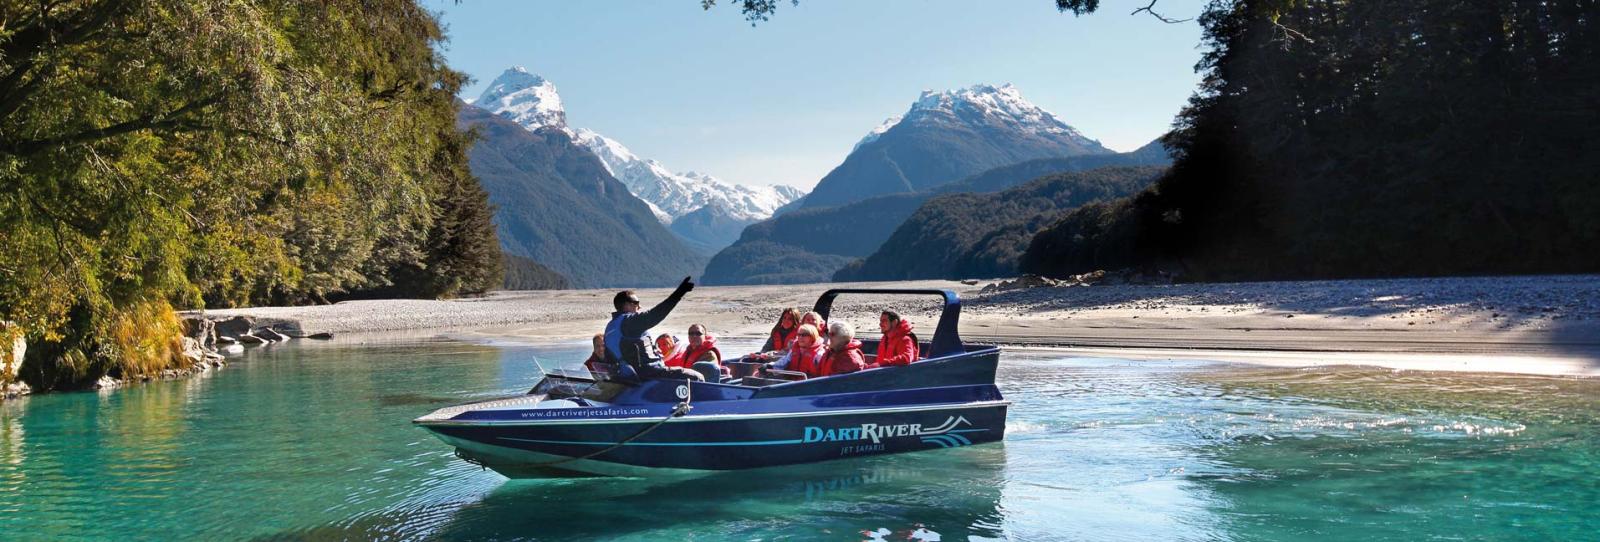 Jet boat stopped in the Dart River with passengers enjoying the scenery.